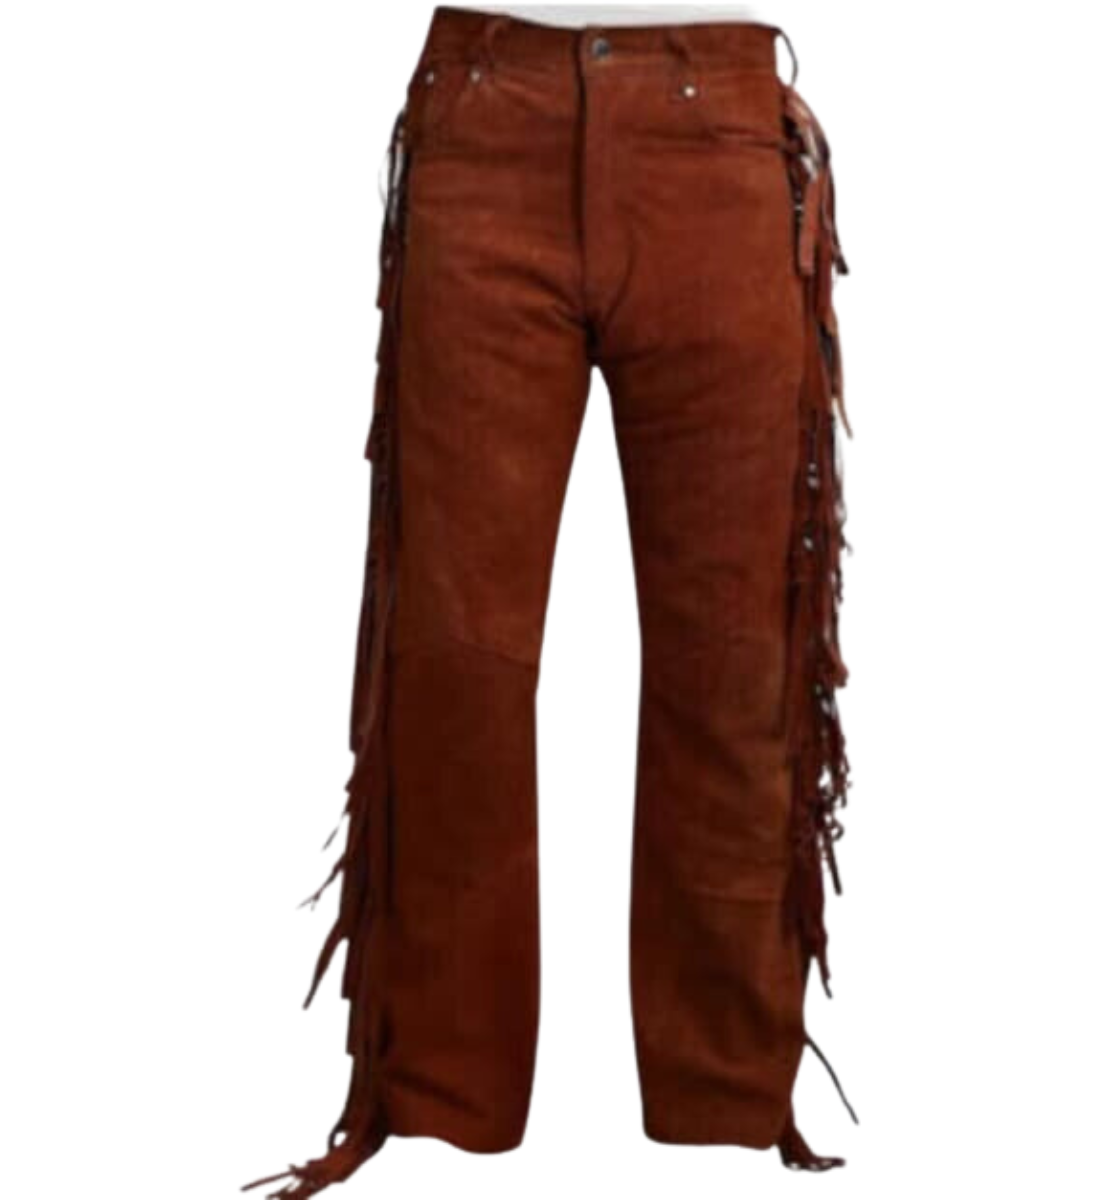 Wild West Elegance: Men's Suede Leather Cowhide Pants with Fringes